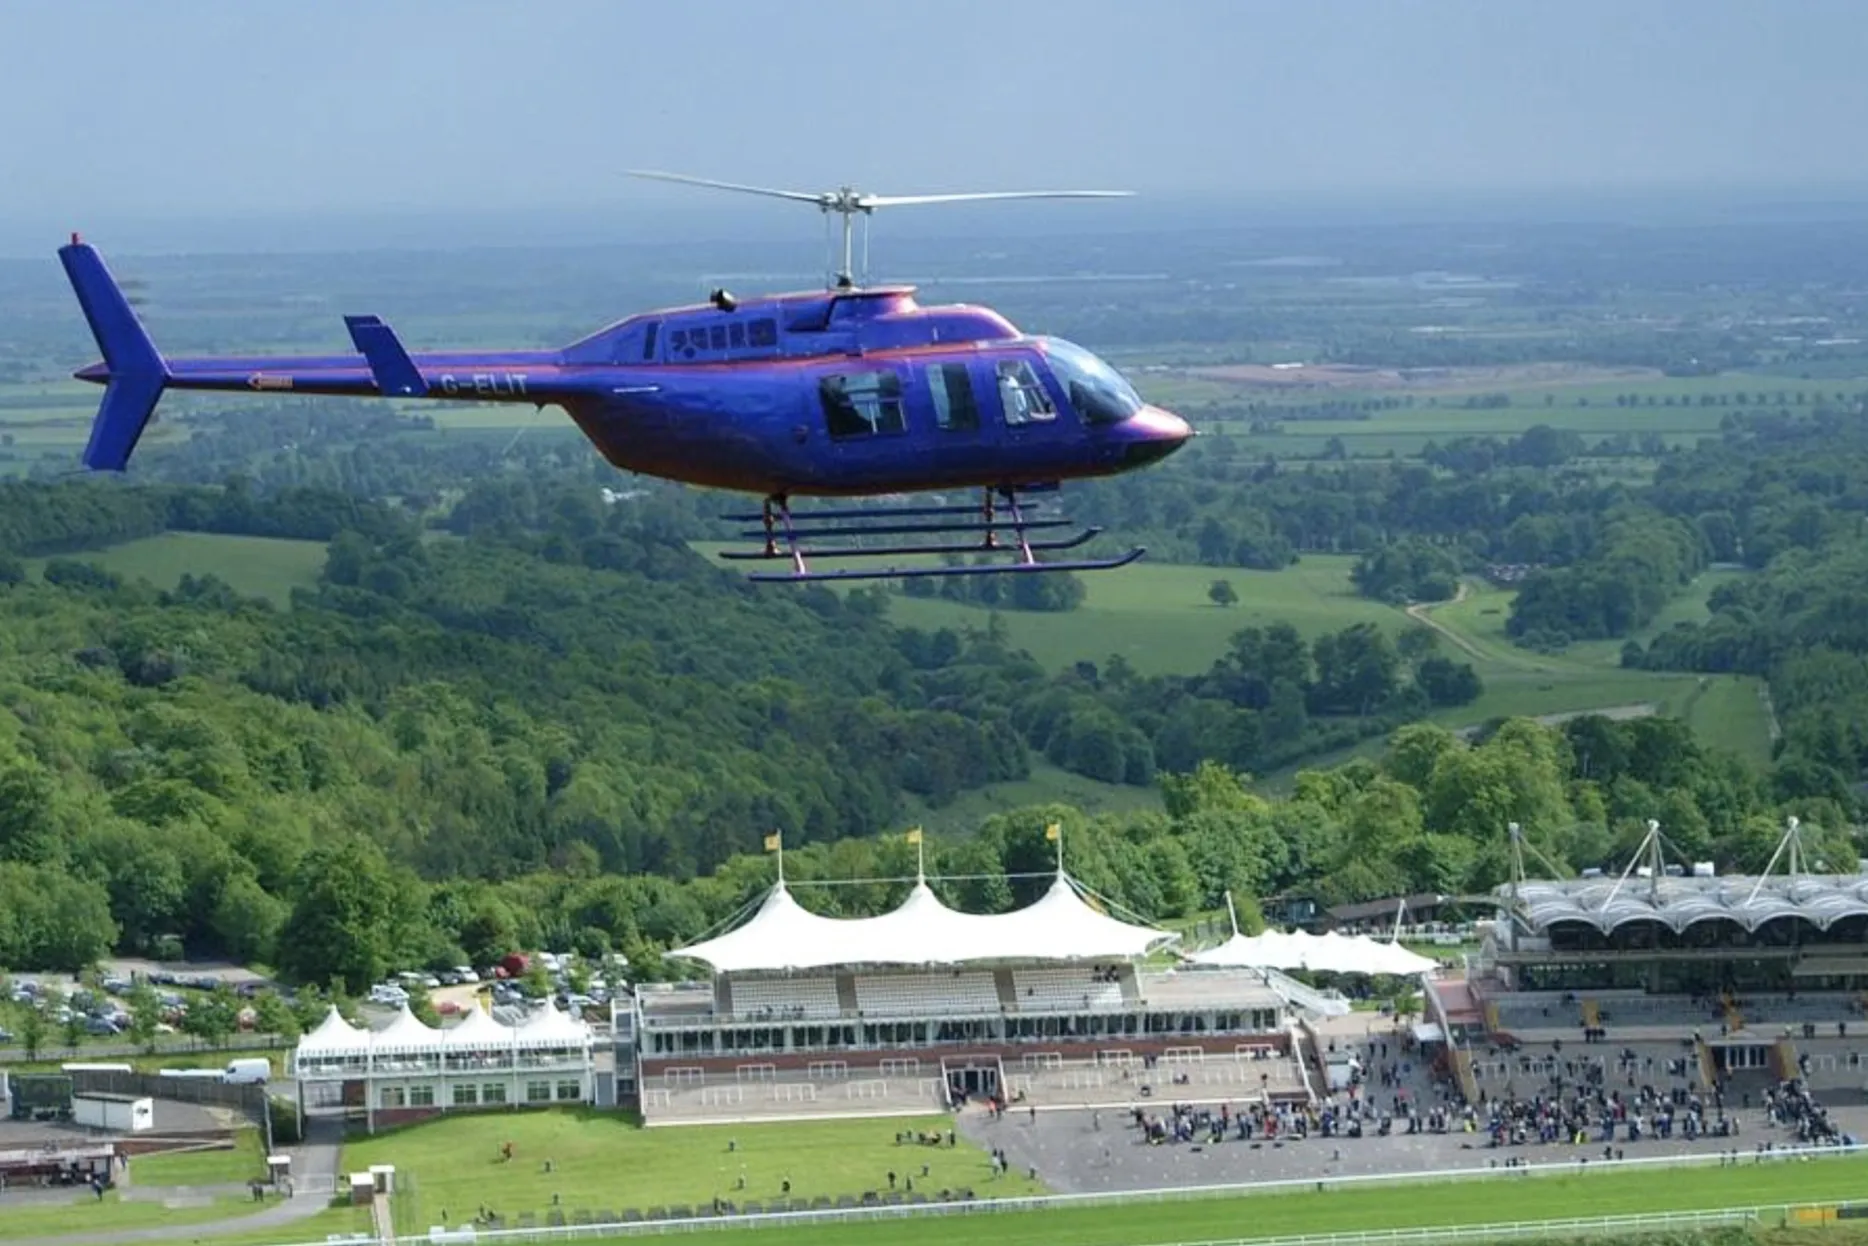 Helicopter charter arriving at the Goodwood Estate for the Goodwood Festival of Speed